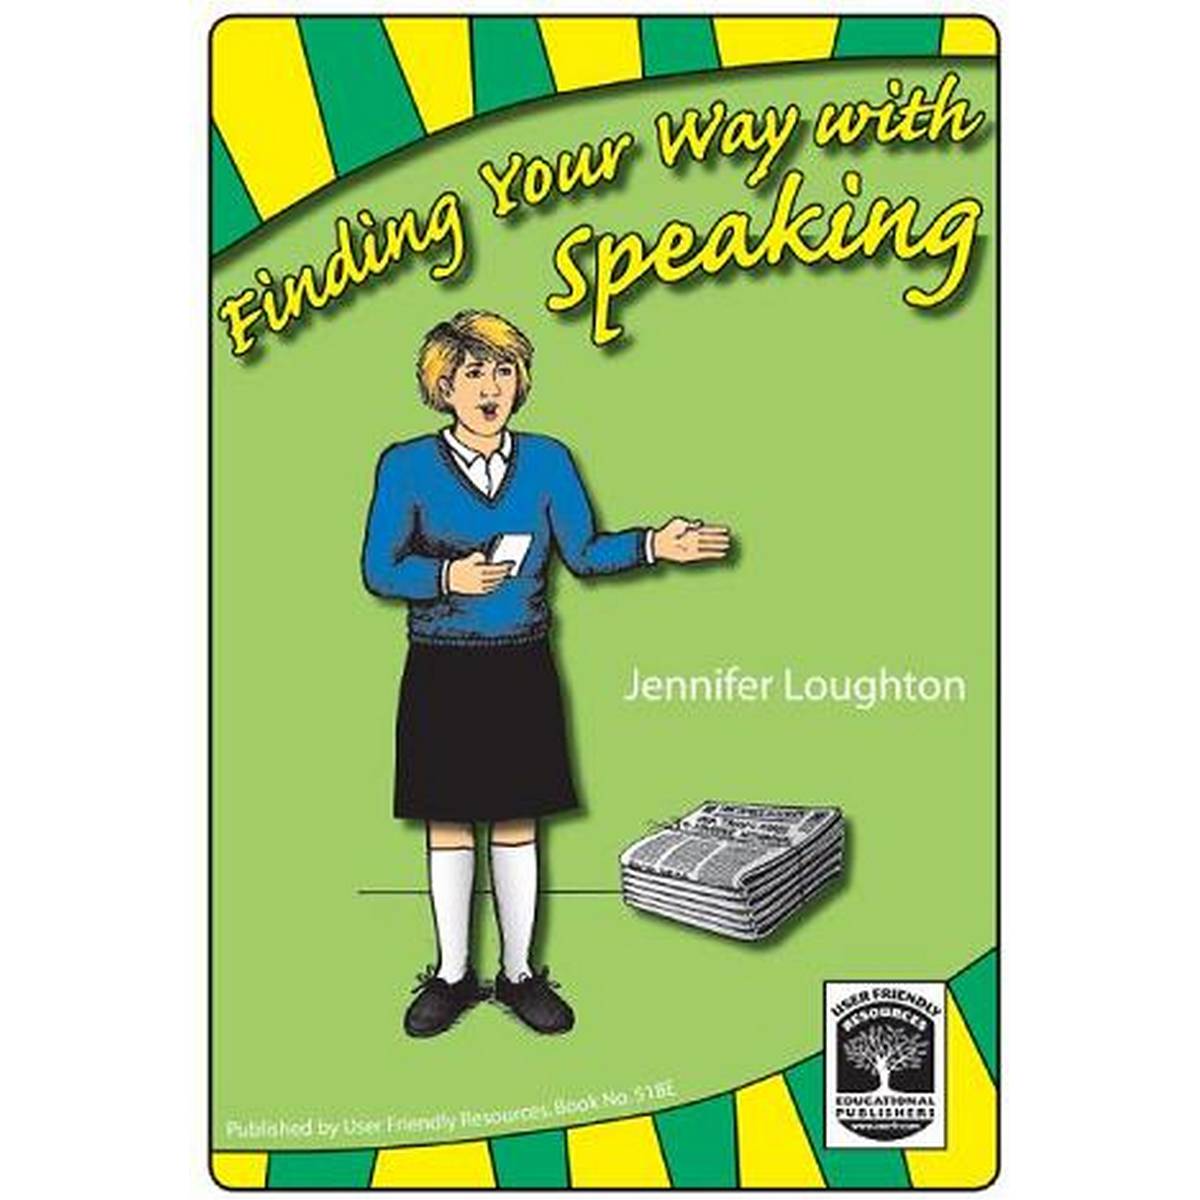 Finding Your Way with Speaking